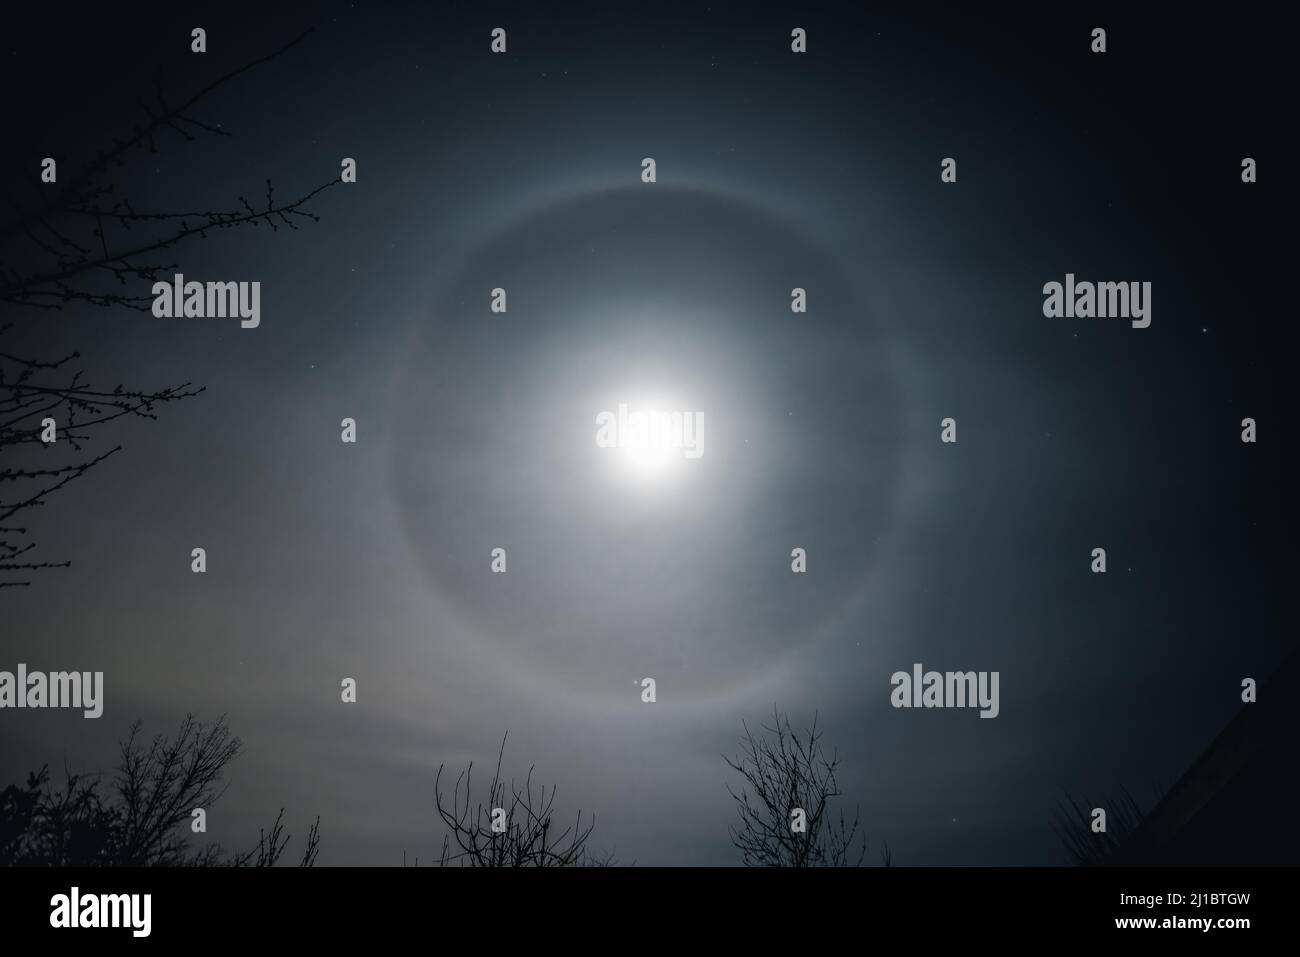 Moon halo ot moonbow clearly shown around the nearly full moon, late at night. Stock Photo